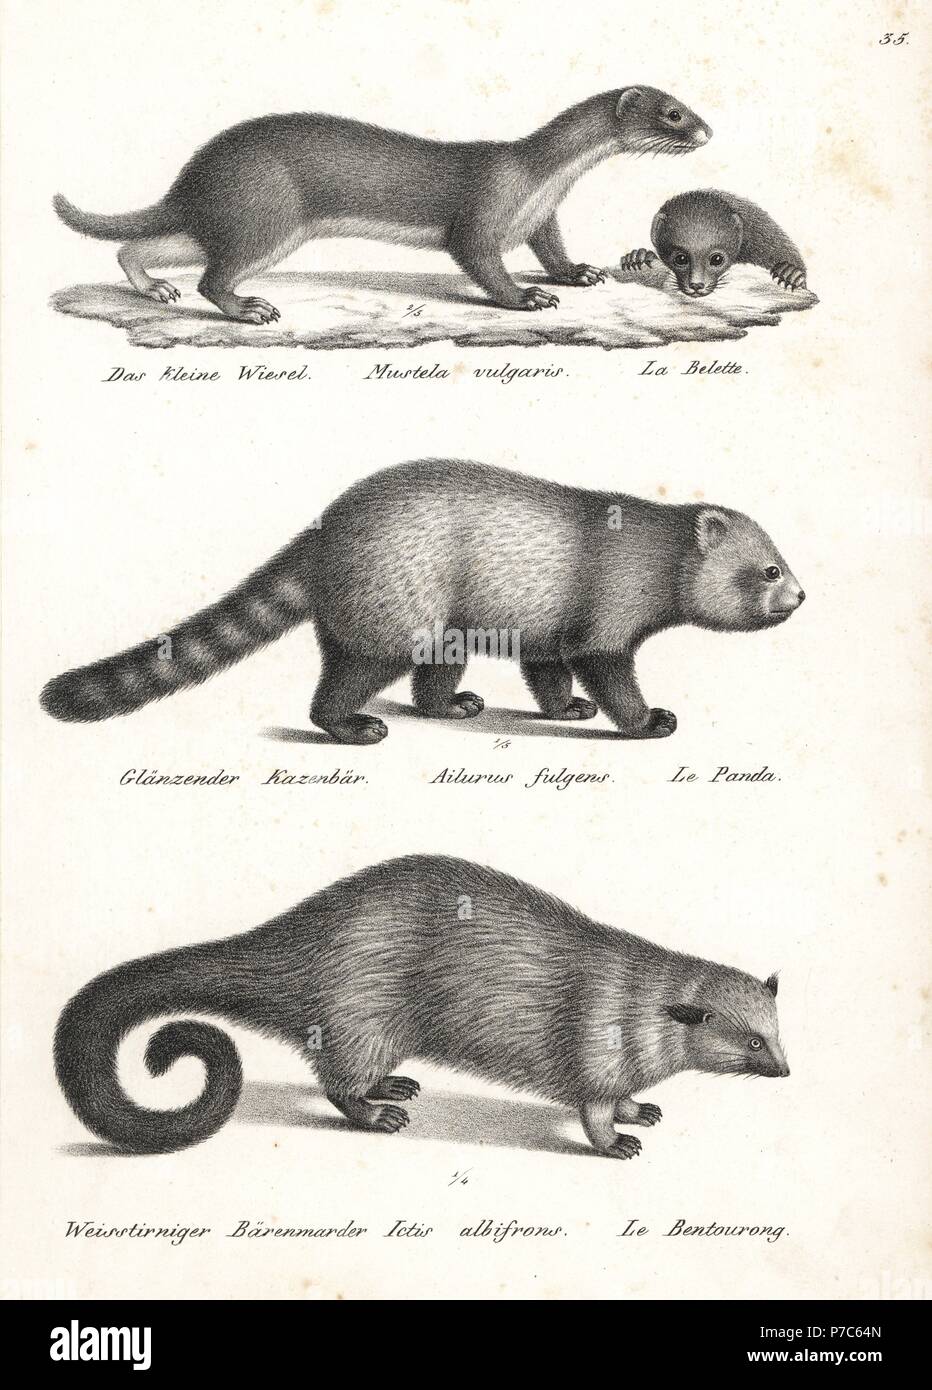 Least weasel, Mustela nivalis 1, red panda, Ailurus fulgens 2, vulnerable, and bearcat, Arctictis binturong 3, vulnerable. Lithograph by Karl Joseph Brodtmann from Heinrich Rudolf Schinz's Illustrated Natural History of Men and Animals, 1836. Stock Photo